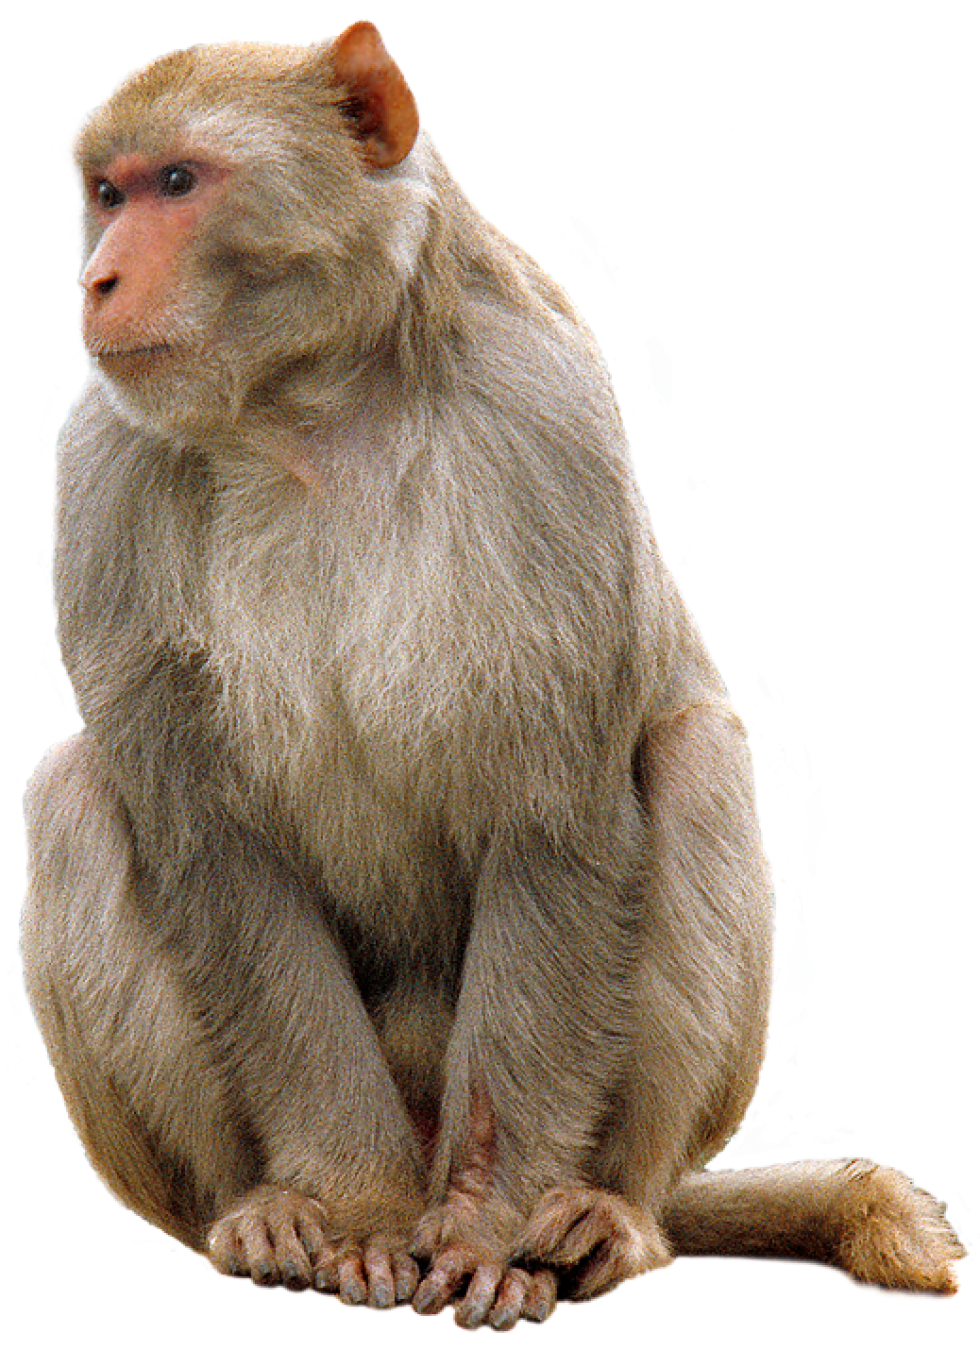 Monkey PNG Image - PurePNG | Free transparent CC0 PNG Image Library